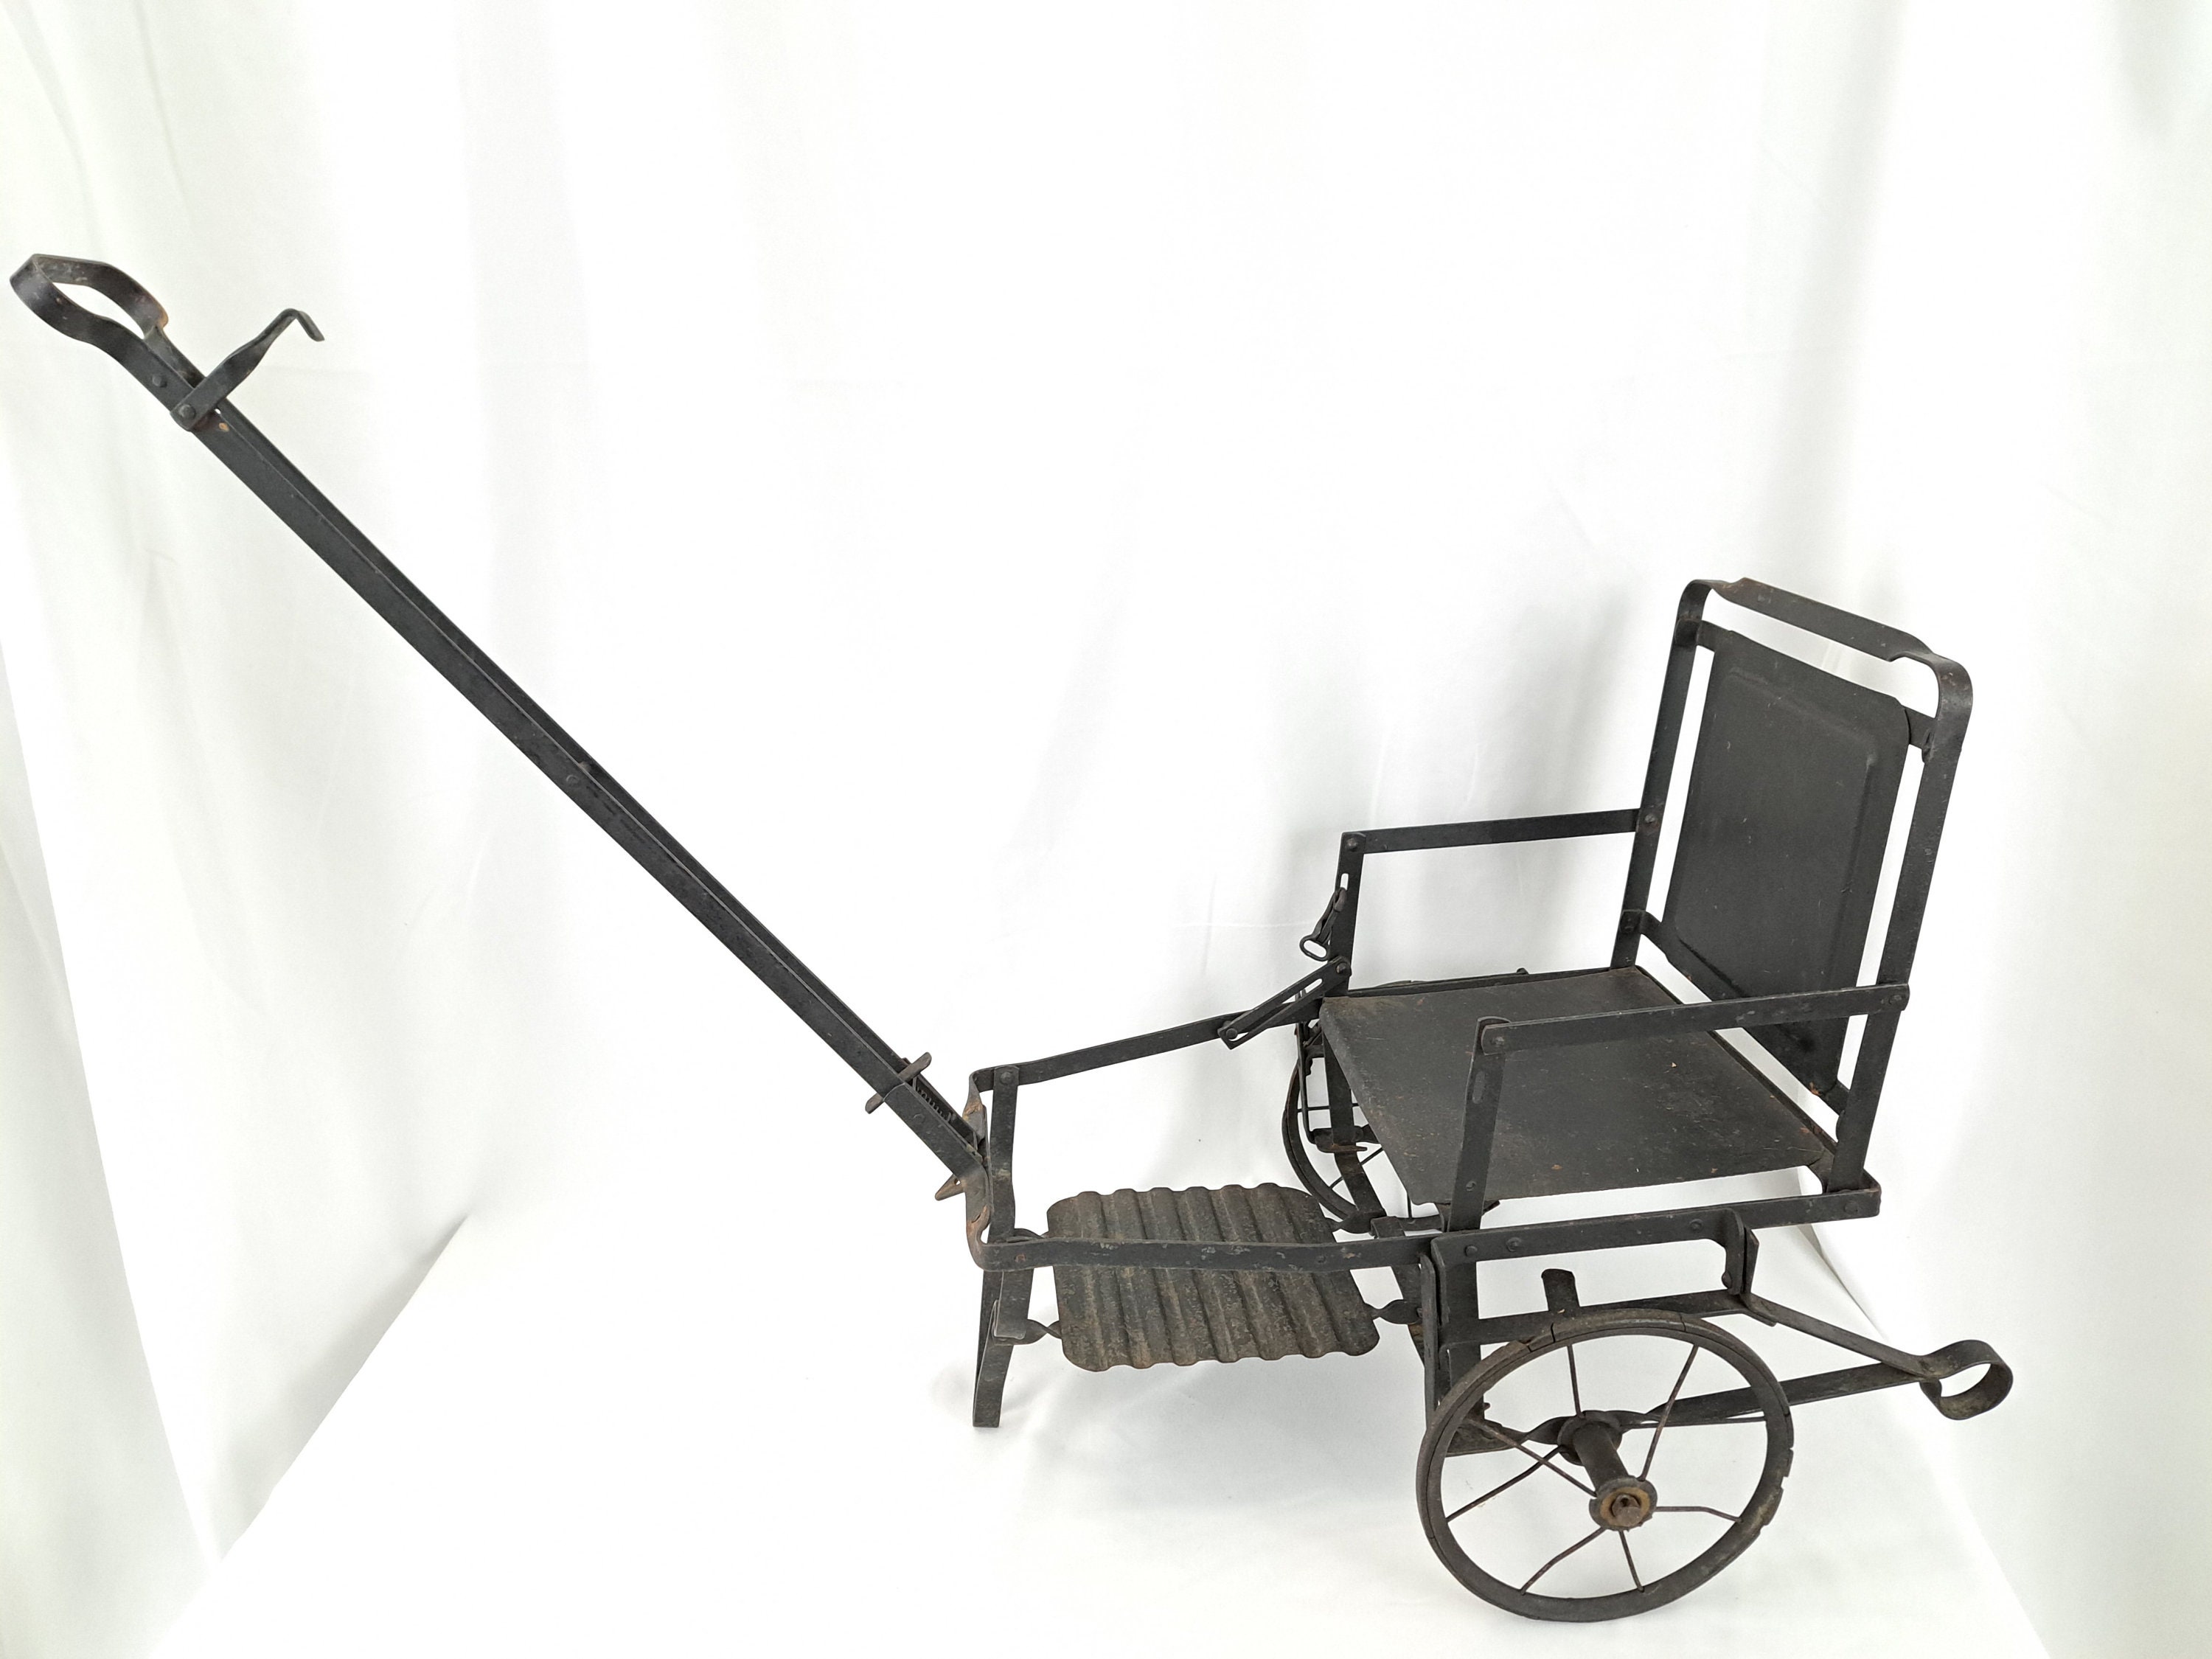 Old Vintage Styled Baby Carriage-stroller On White Background